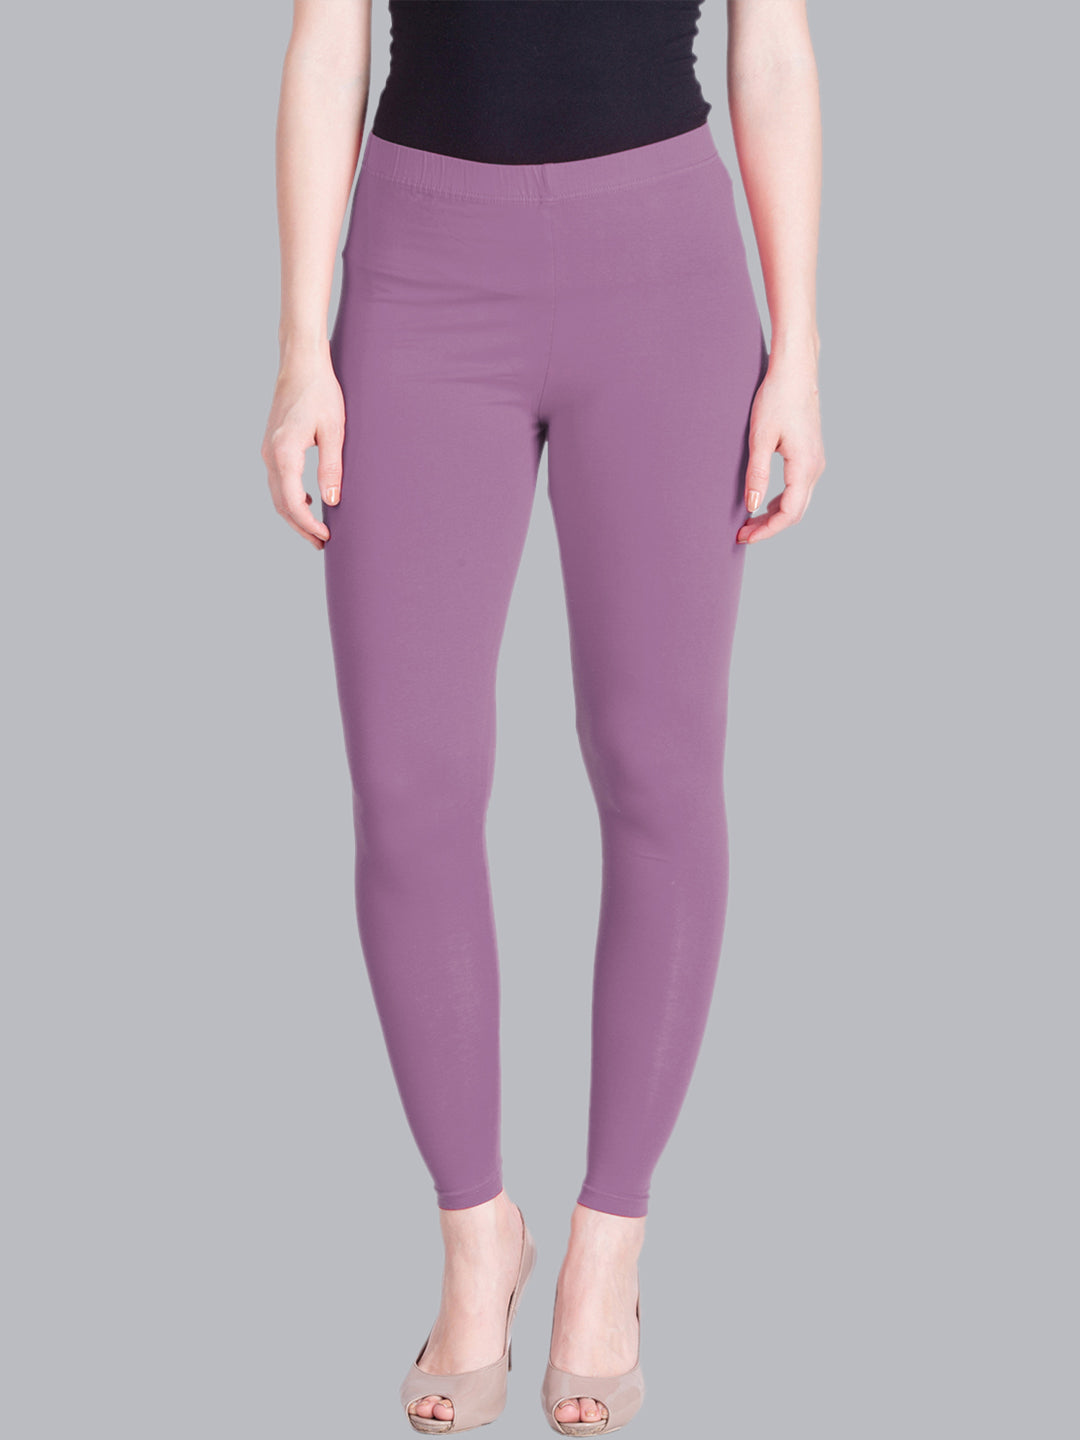 Buy LYRA Legging (Purple, Dark Blue, Solid)-Lyra_IC_03_67_FS_2PC Online In  India At Discounted Prices